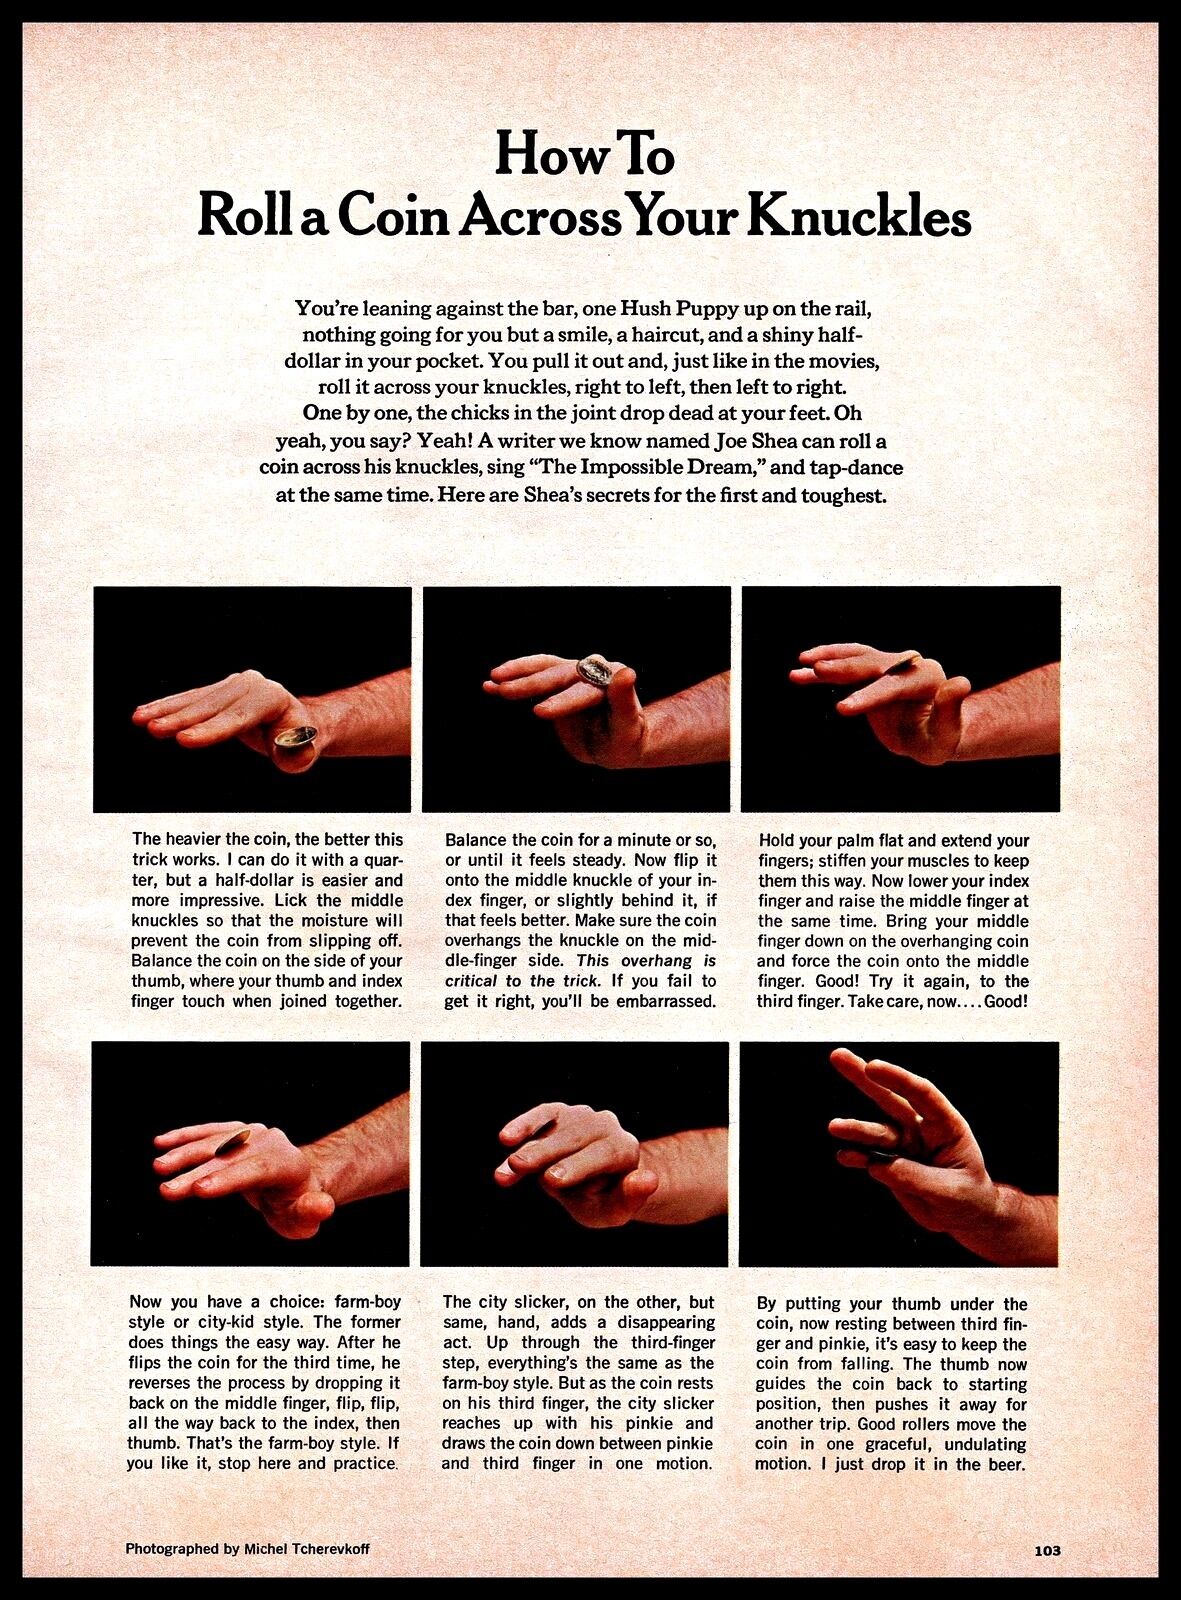 How to Roll a Coin Across Your Knuckles- Then Vanish